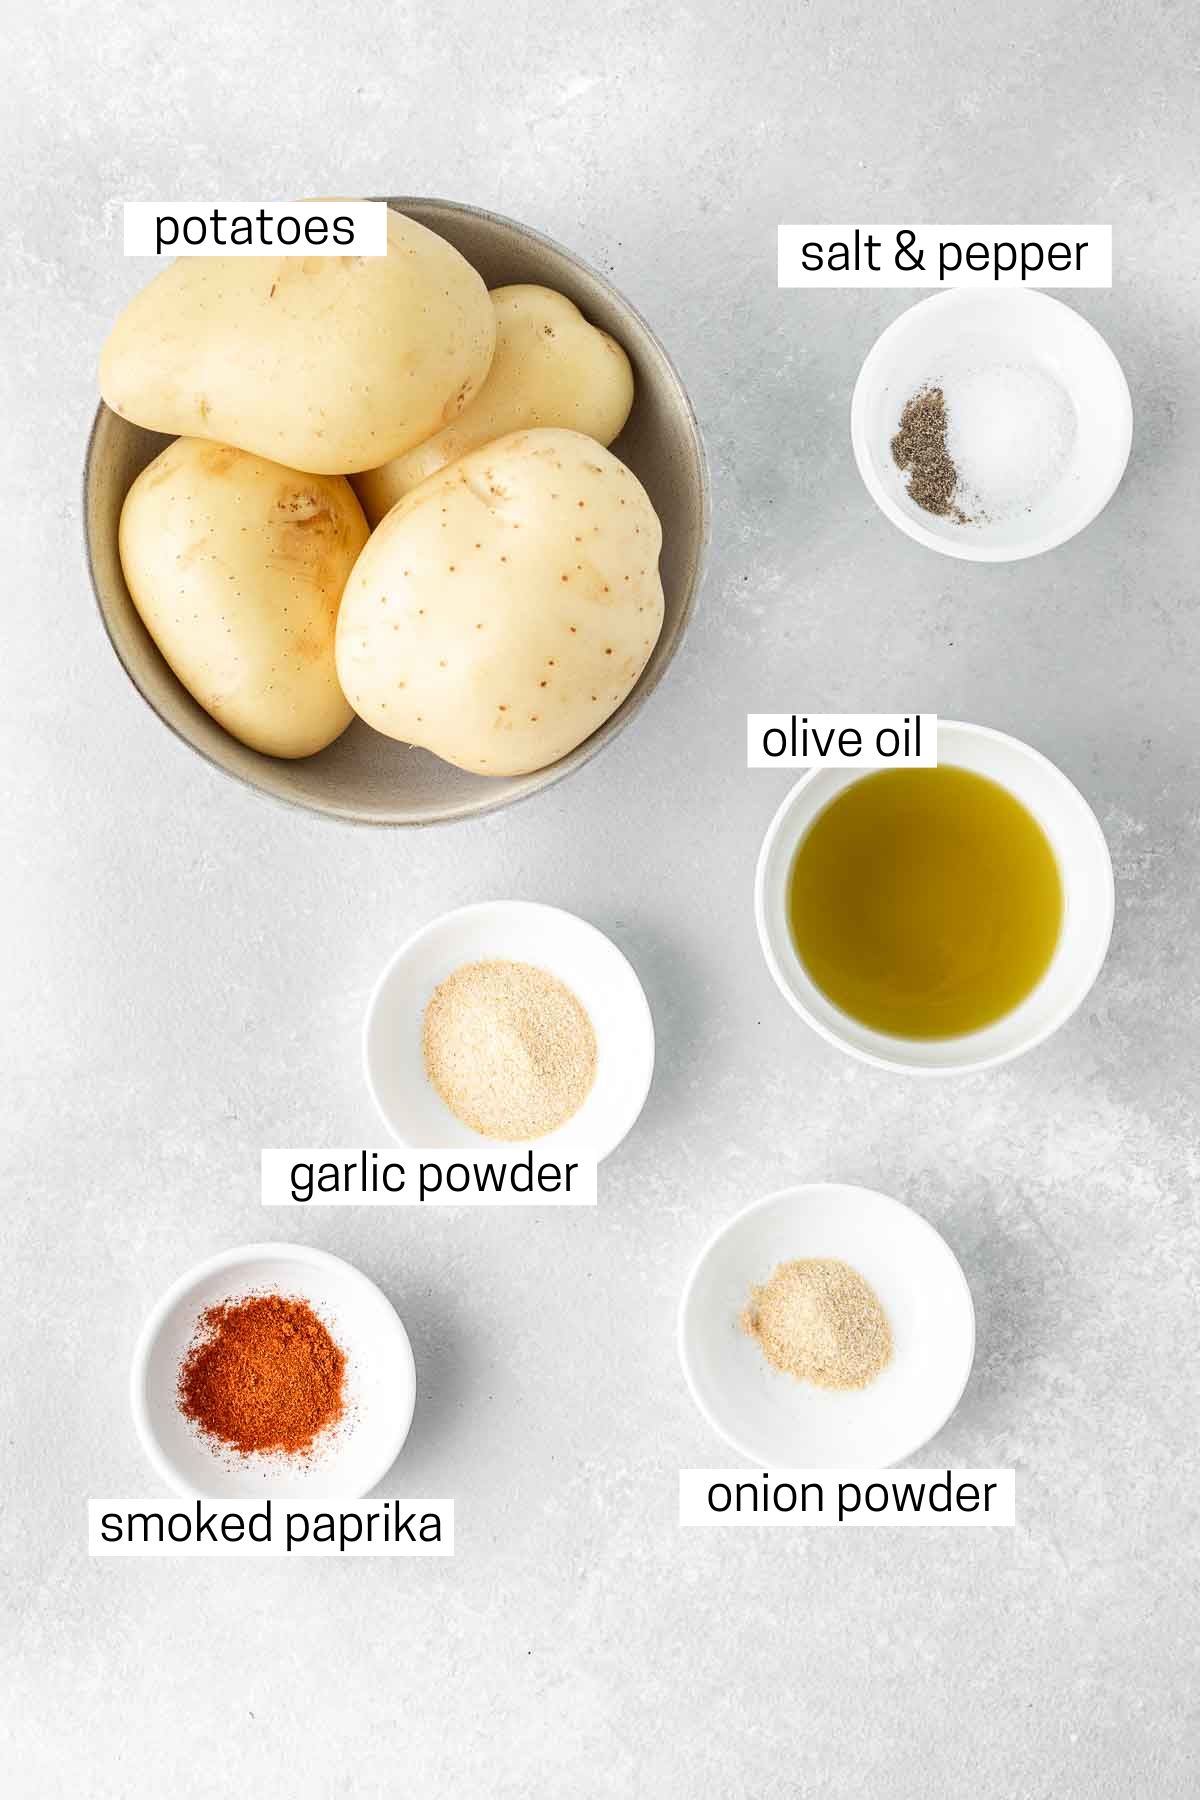 All ingredients needed to make oven baked potato wedges.